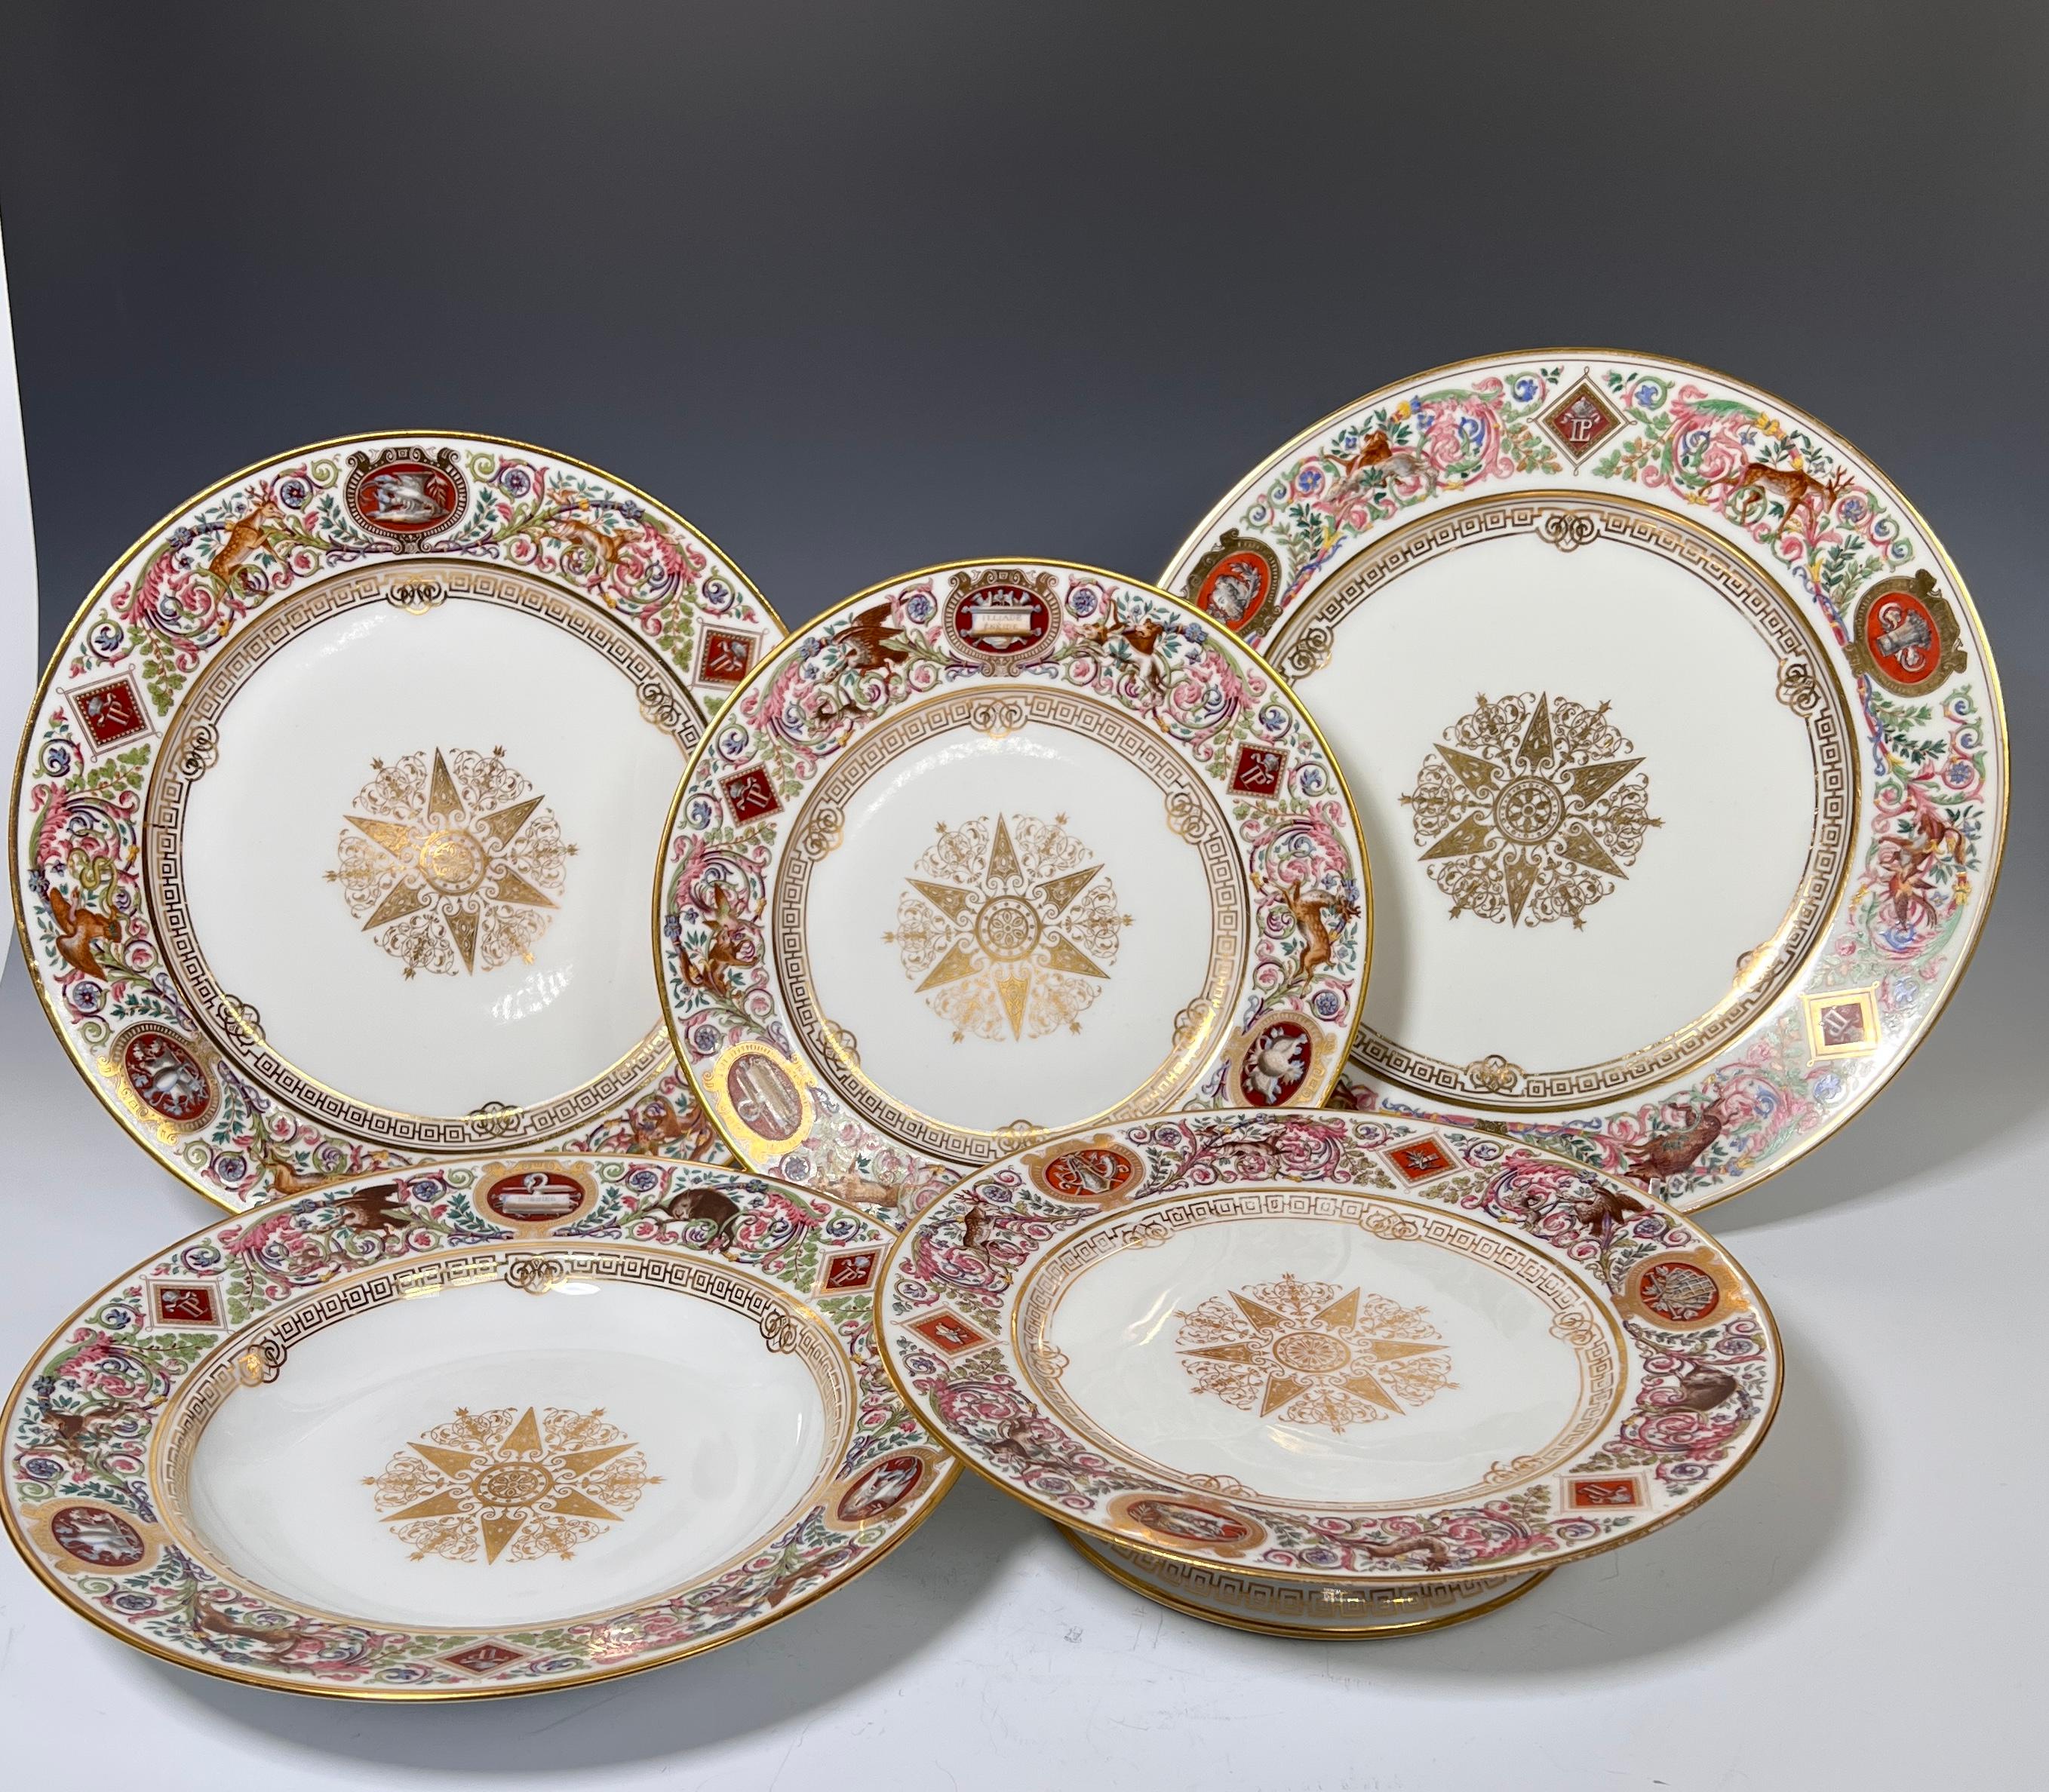 This service for 12 is the iconic Hunting Pattern made for Louis-Phillipe at Chateau Fontainebleau dated 1846. This museum quality set consists of 50 pieces including 12 dinner plates, 12 large rimmed soup bowls, 12 dessert plates and 12 luncheon